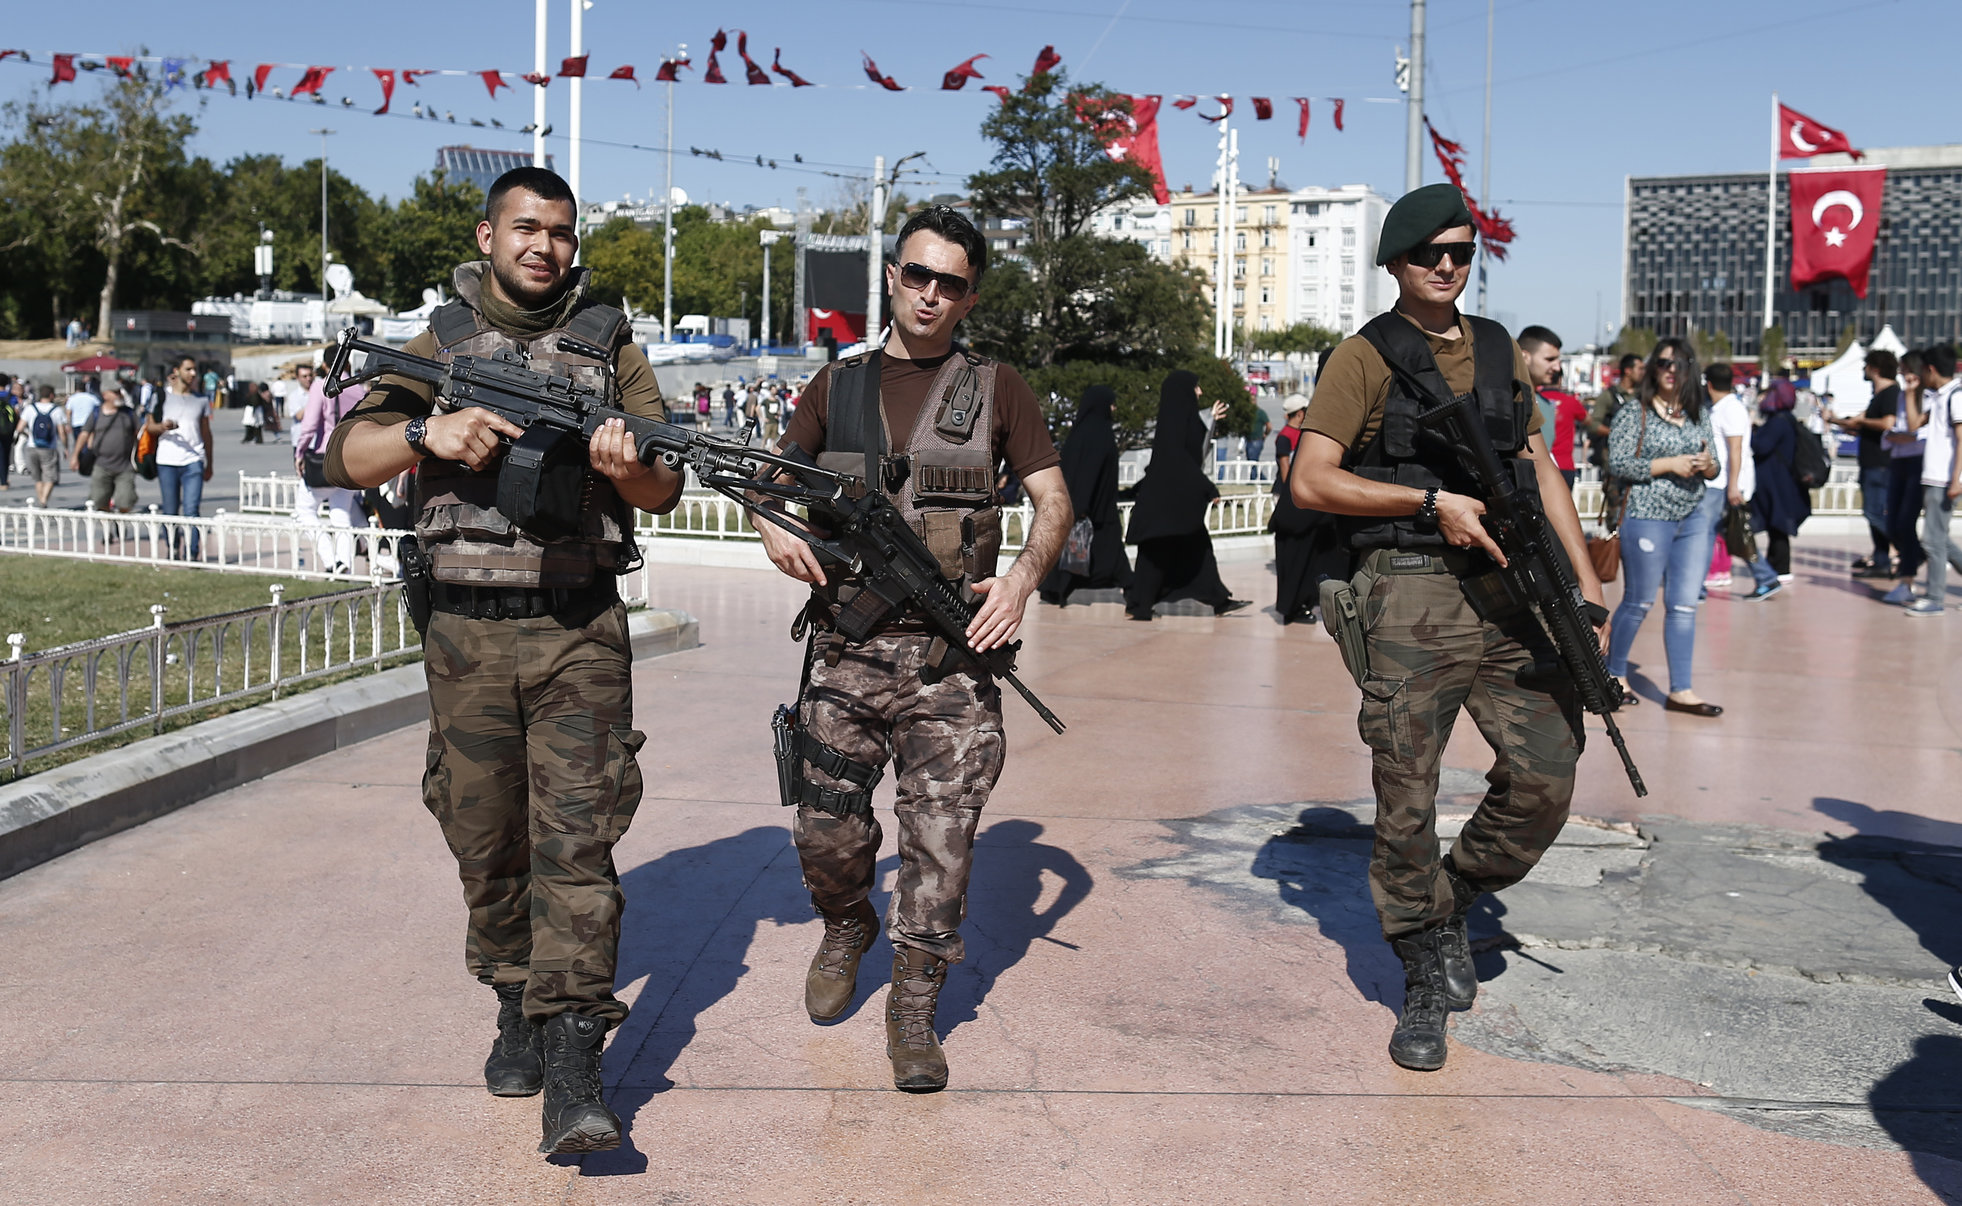 Special forces in Istanbul's Taksim Square